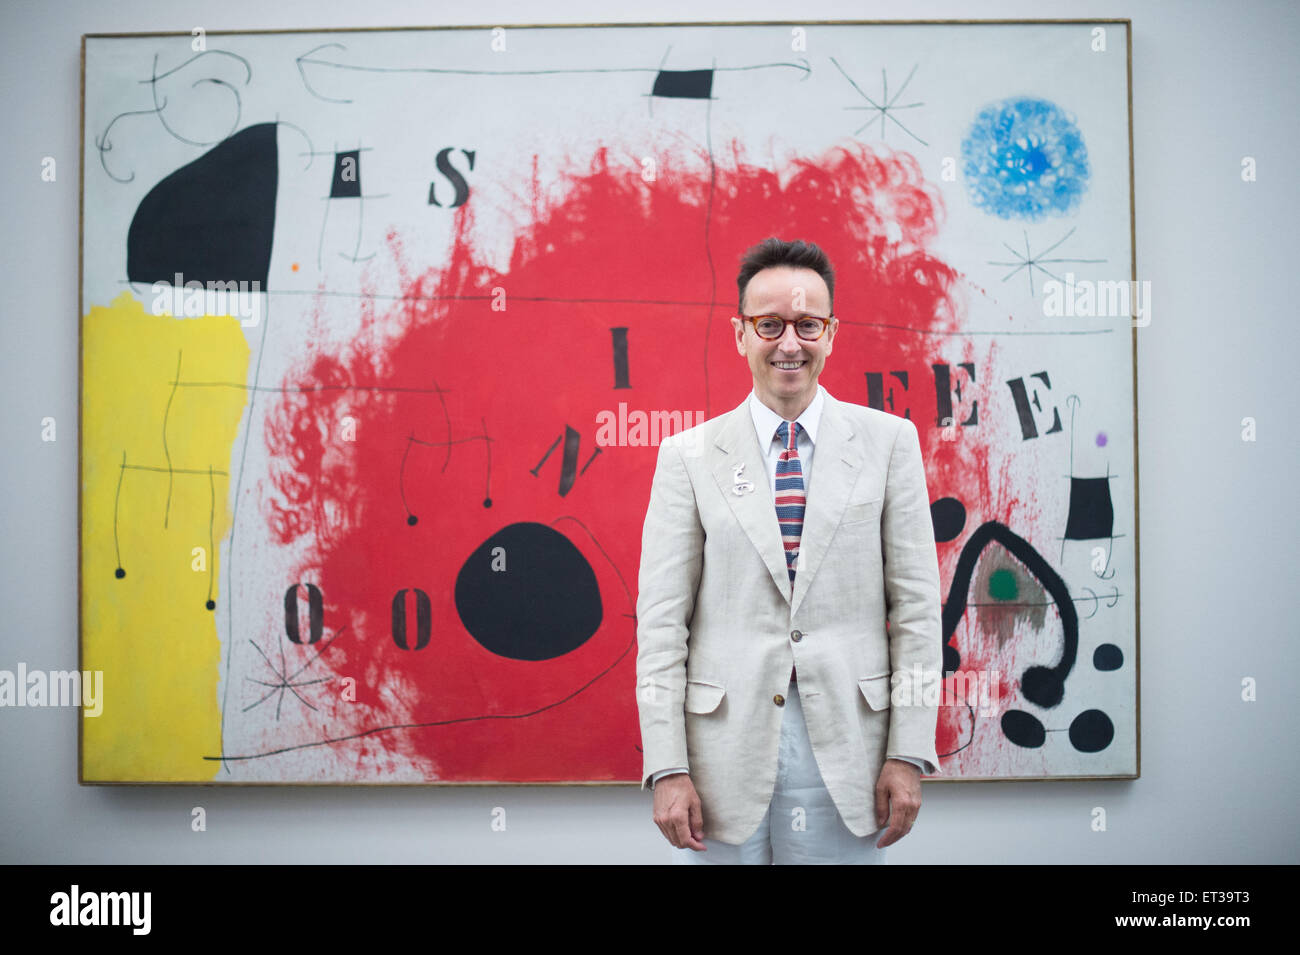 Duesseldorf, Germany. 11th June, 2015. Joan Punyet Miro, the grandson of the Catalan painter Miro (1893-1983), poses after a press conference in front of the painting 'Silence' (17. May 1968, oil on canvas) by Miro in the Kunstsammlung Nordrhein-Westfalen in Duesseldorf, Germany, 11 June 2015. The exhibition 'Miro. Painting as Poetry.' - which includes around 110 pieces from all periods of the artist's work - can be seen from 13 June to 27 September 2015 in K20. Photo: MAJA HITIJ/dpa/Alamy Live News Stock Photo